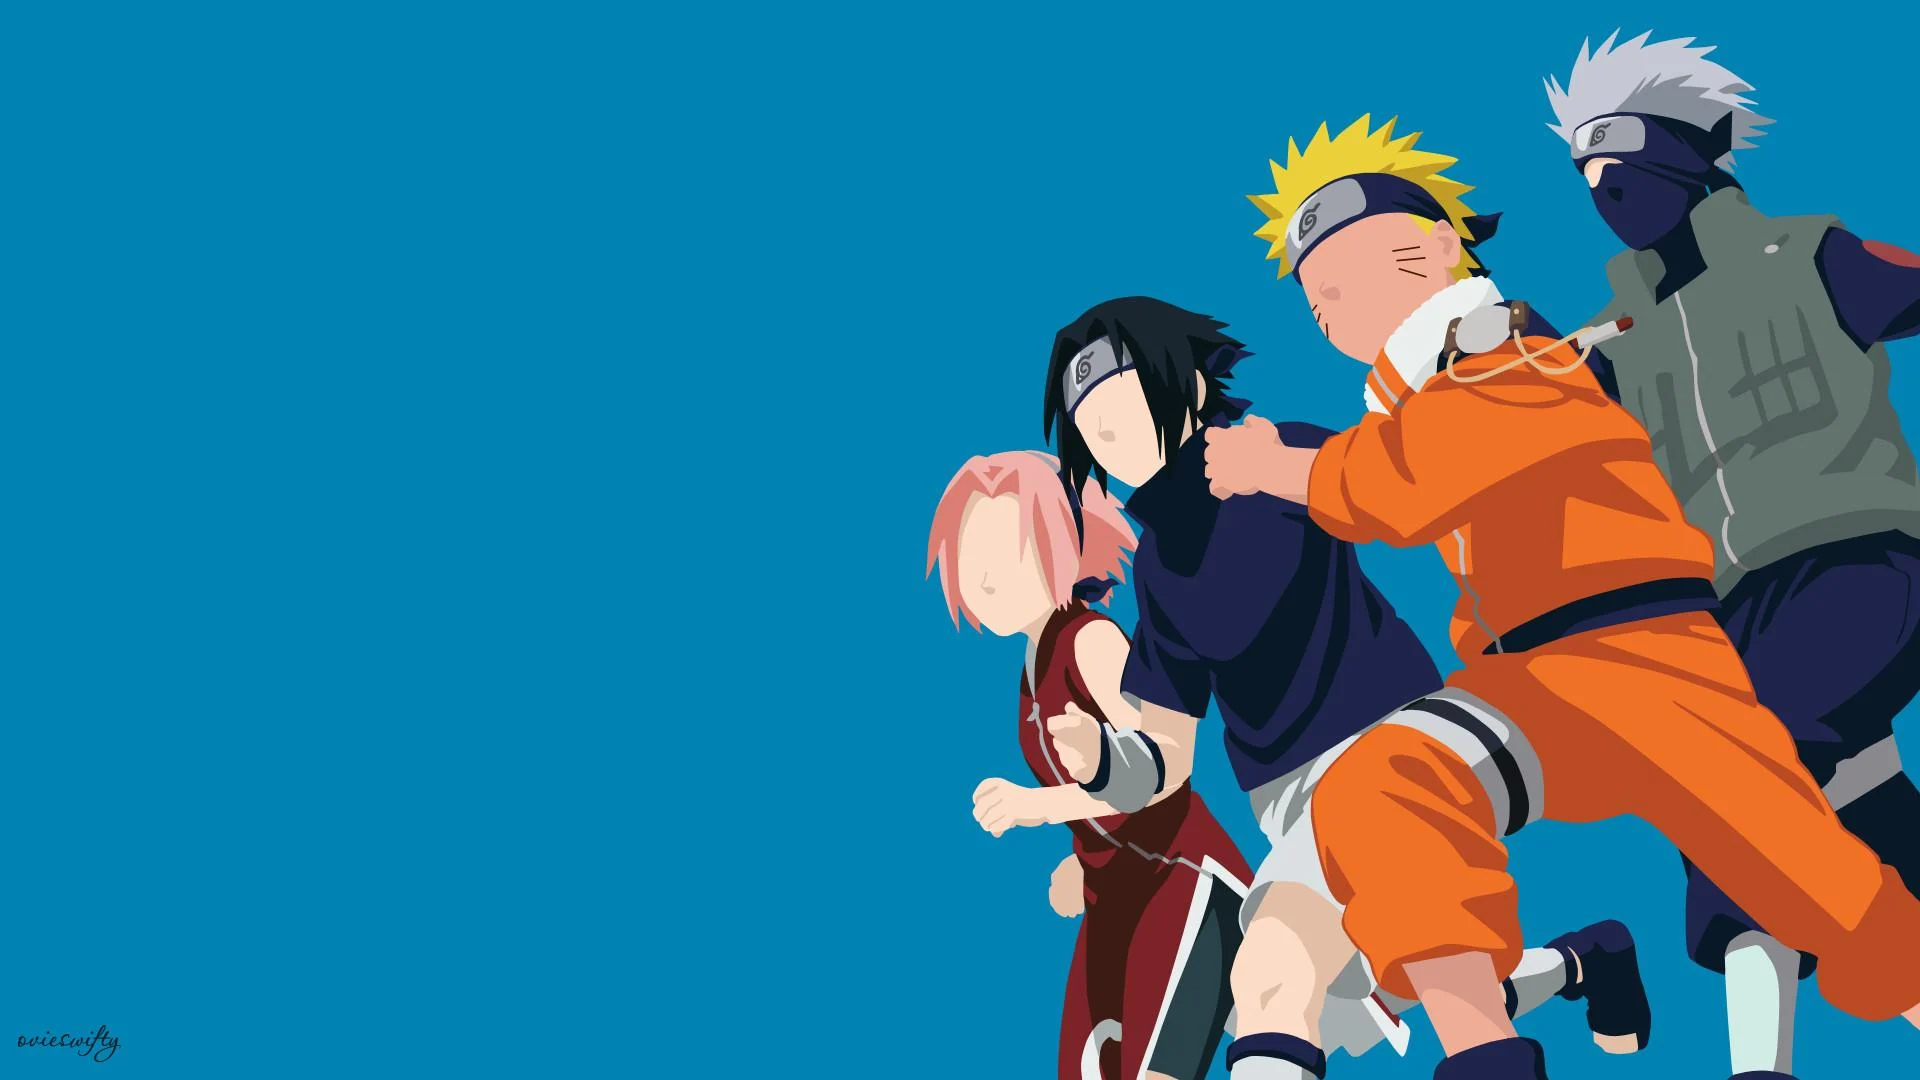 1920x1080 Aesthetic Naruto Computer Wallpapers